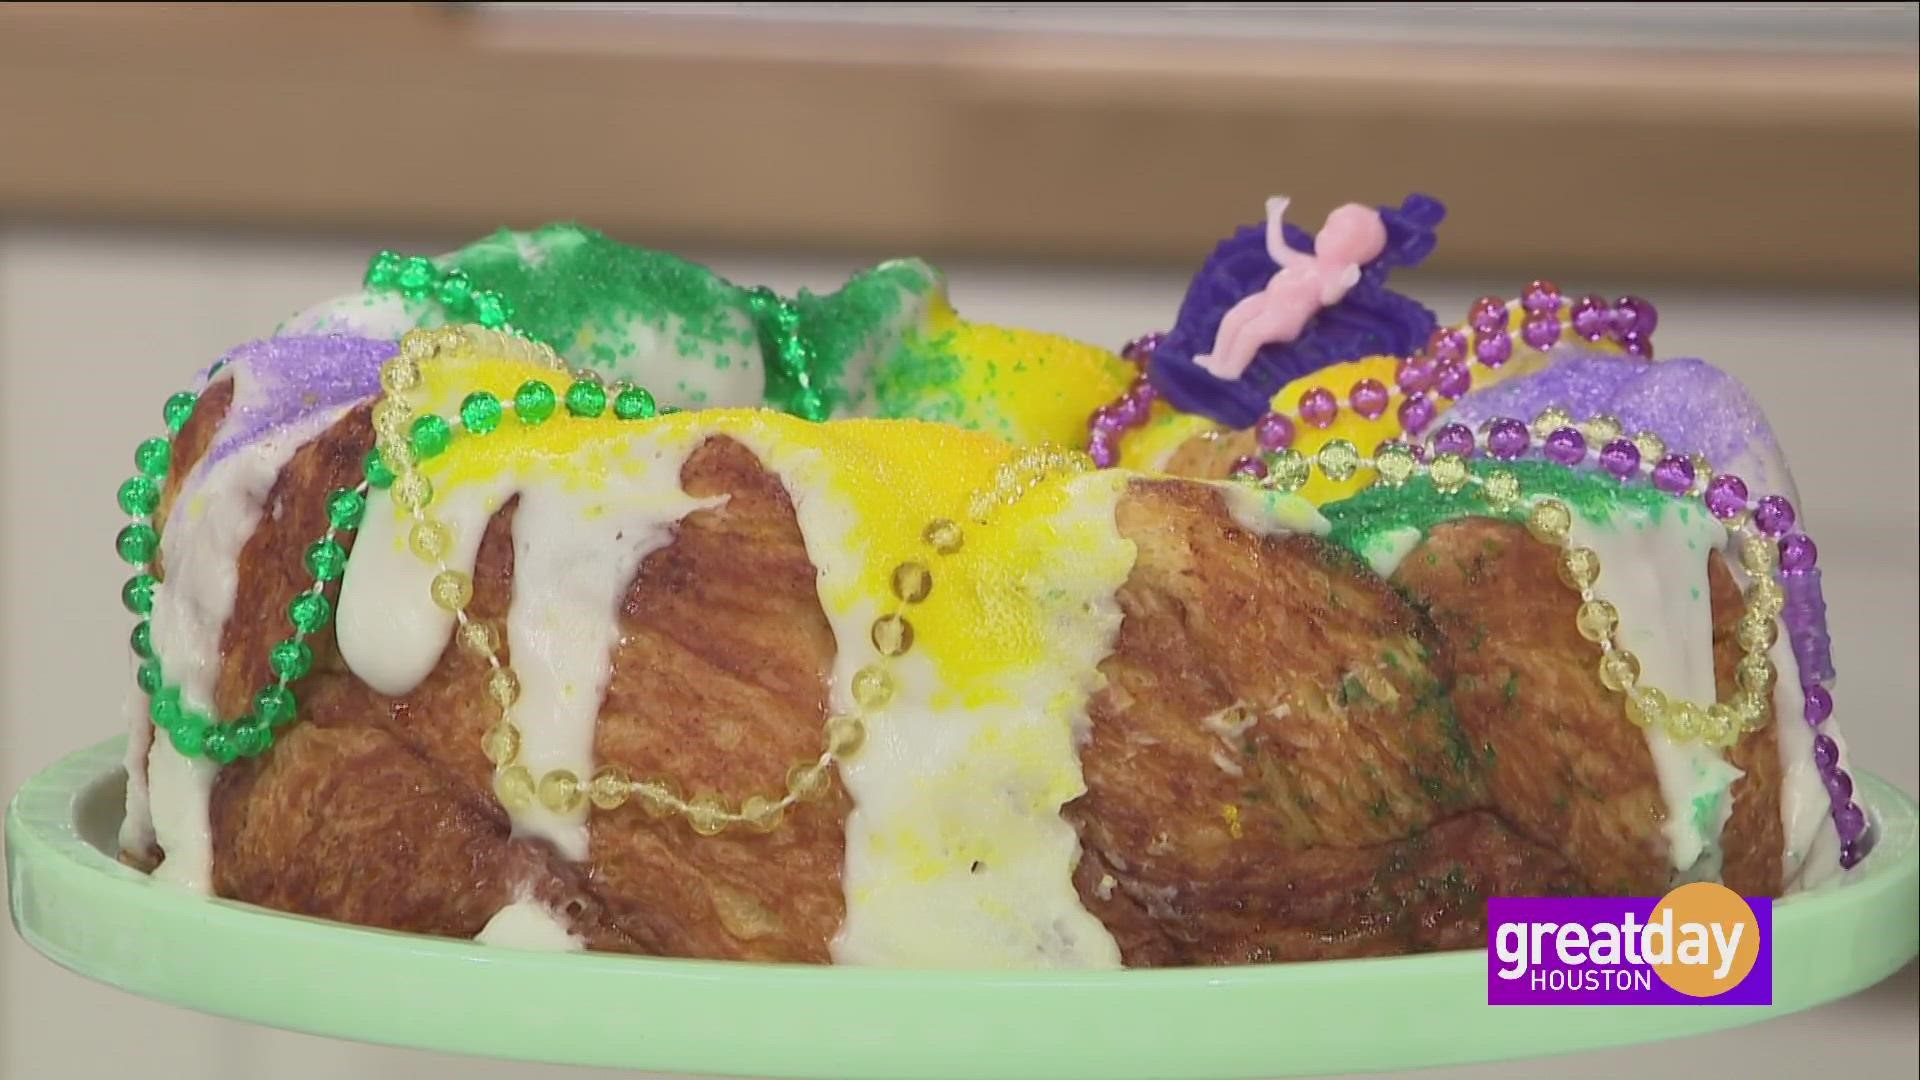 Sara Brook with Dessert Gallery shares the history of Mardi Gras King's Cake